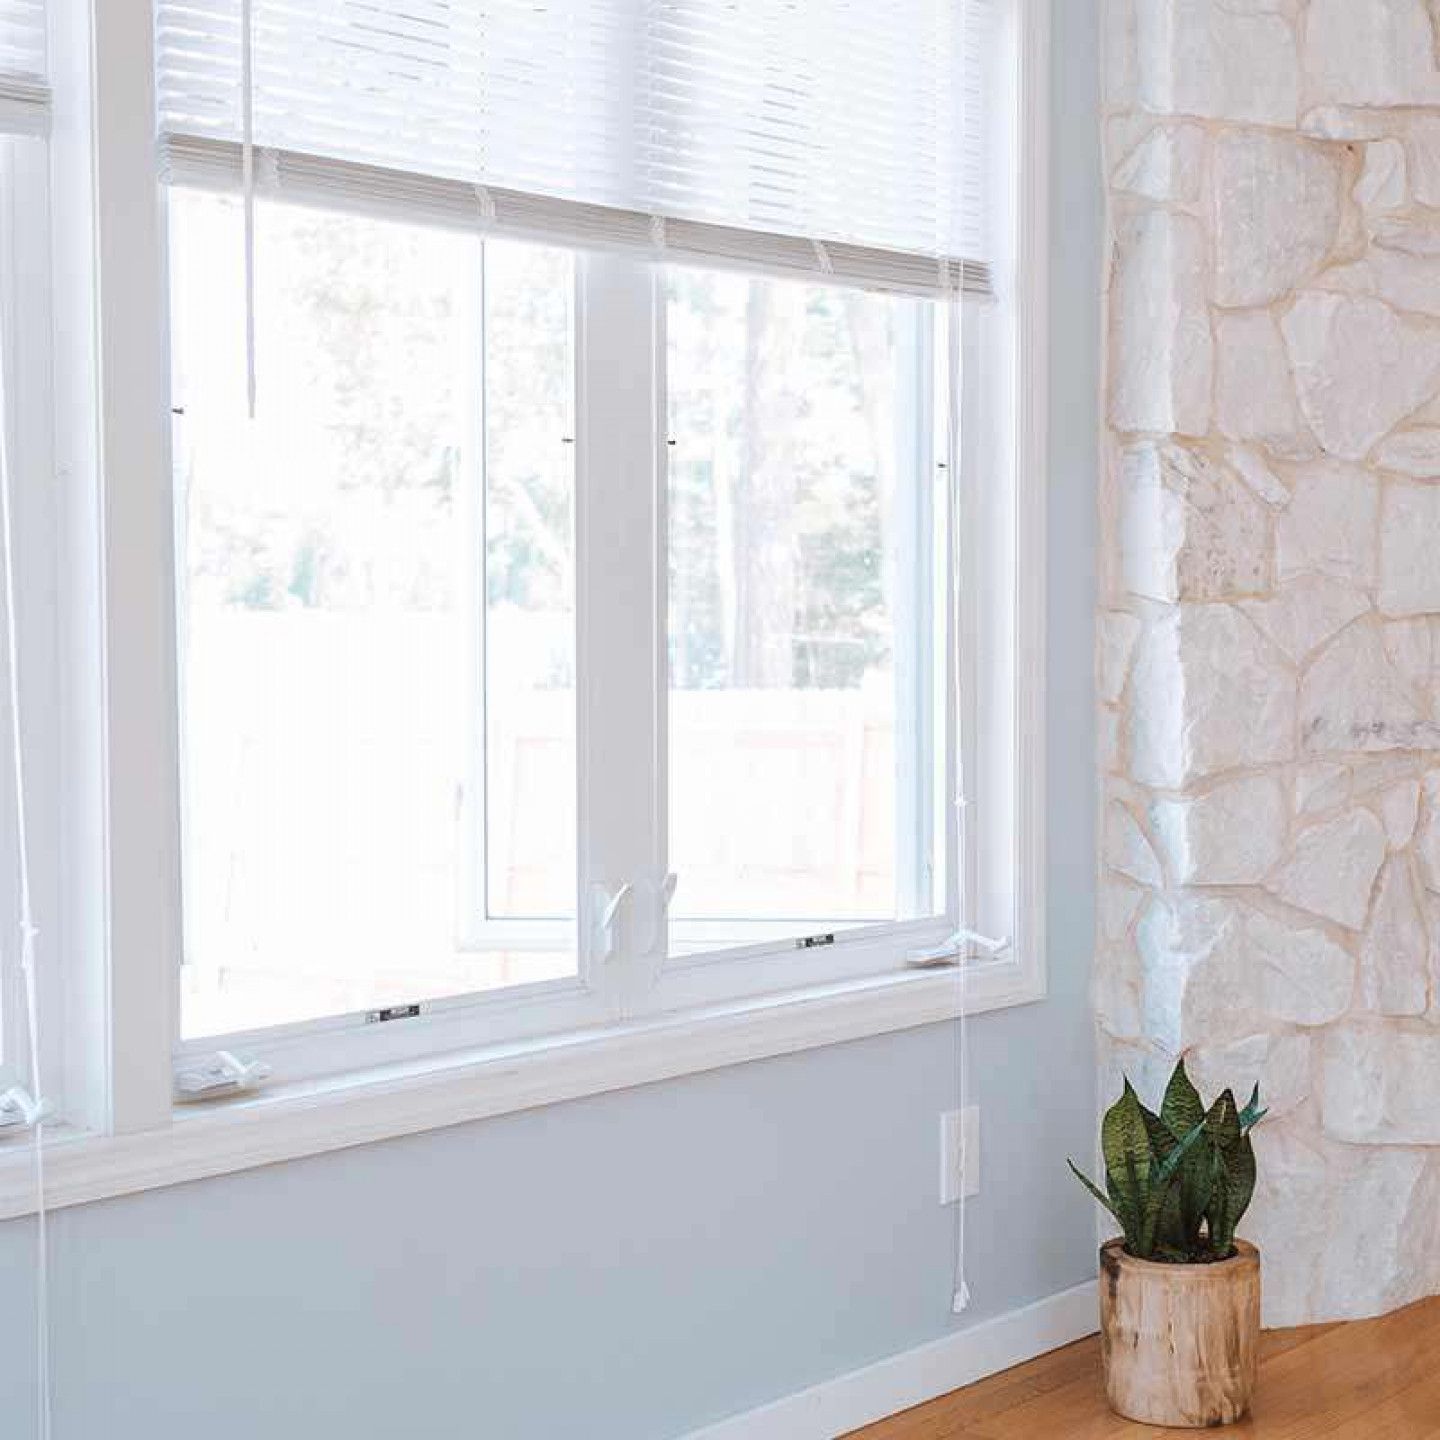 A potted plant is sitting next to a window in a living room